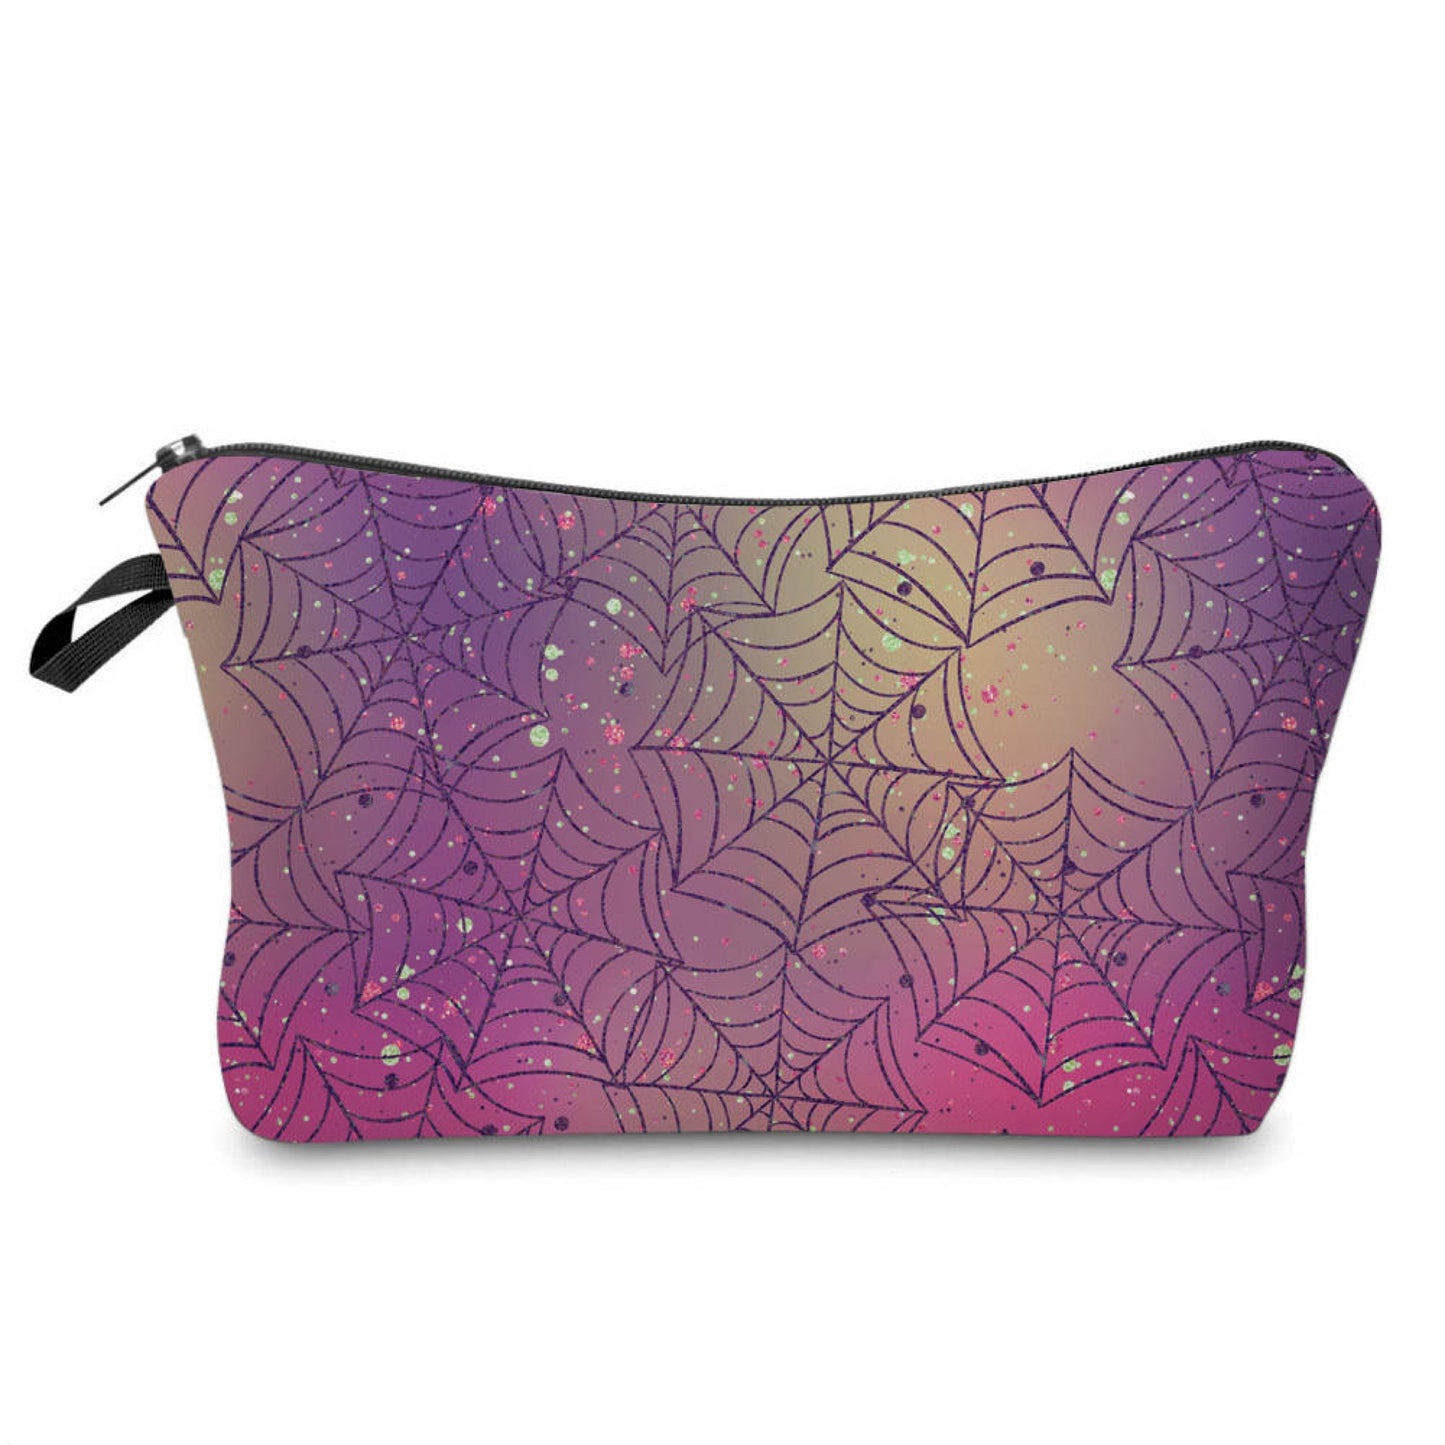 Pouch of the Week - Halloween